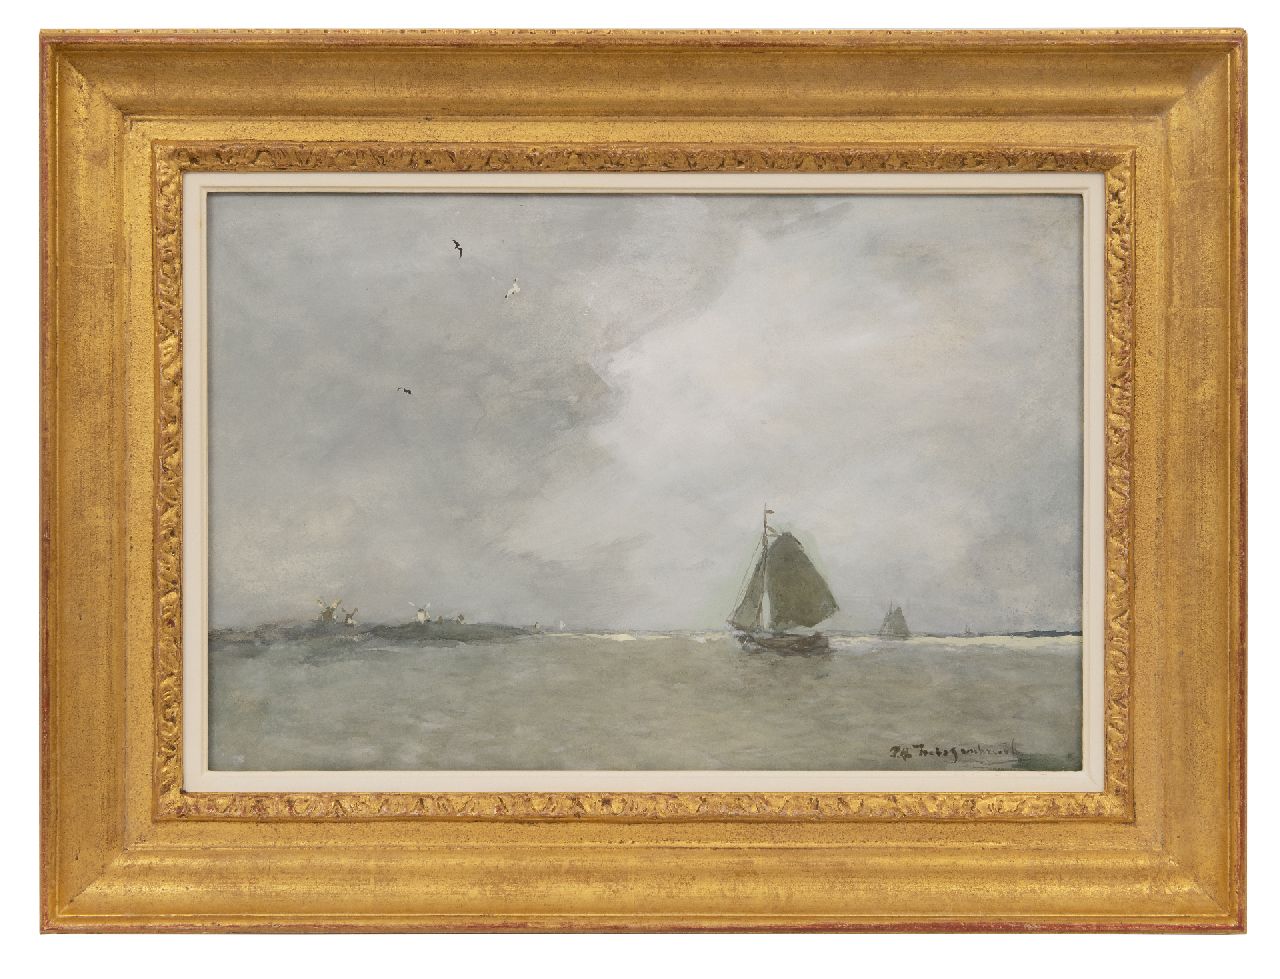 Weissenbruch H.J.  | Hendrik Johannes 'J.H.' Weissenbruch, Sailing ships on the lake, watercolour on paper 34.8 x 52.4 cm, signed l.r.